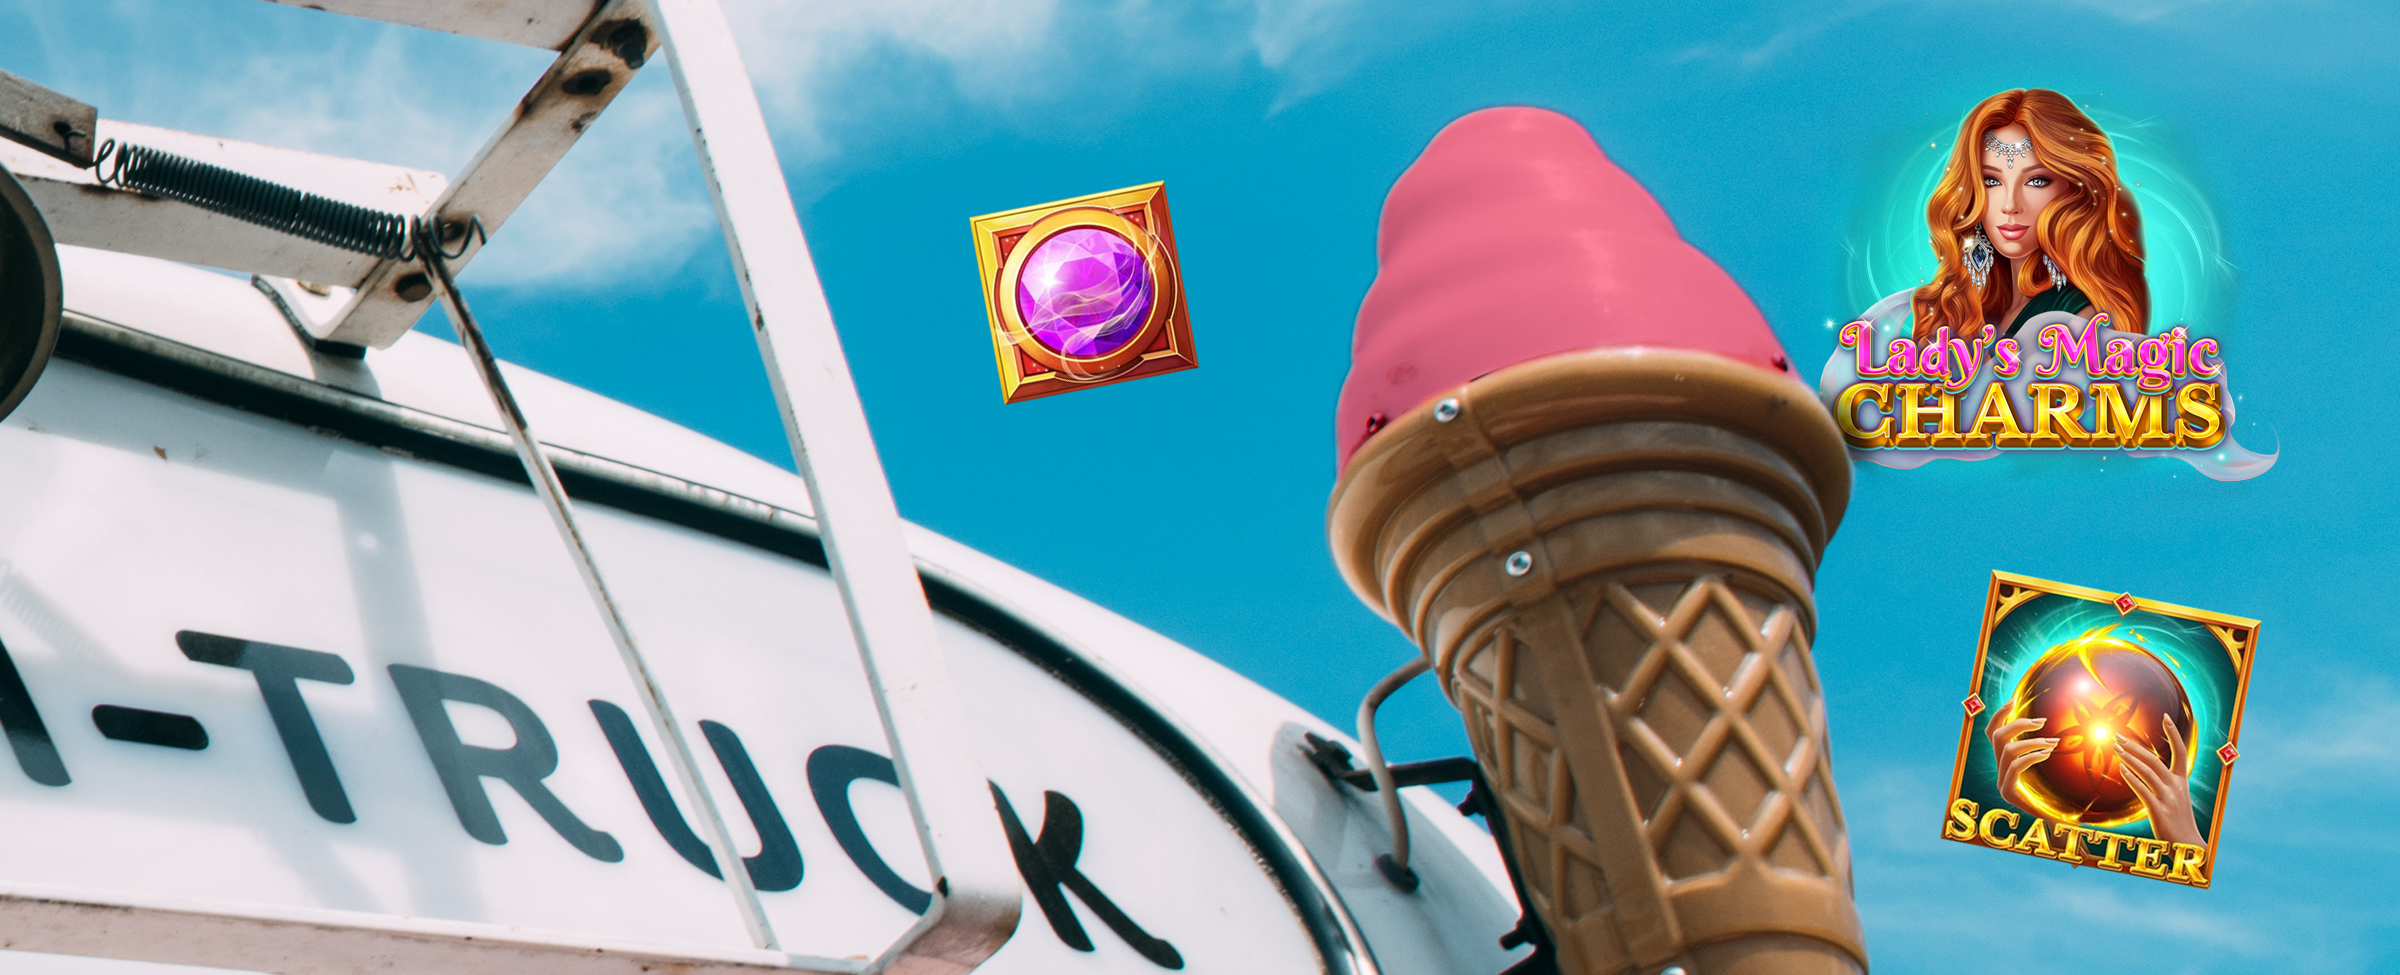 An ice cream van, with a large a strawberry ice cream prop cone. To the left, the word "truck" is written in retro lettering. Encircling the ice cream cone are three slots symbols from the Cafe Casino slots game, Lady's Magic Charms Hot Drop Jackpots. These include a gleaming purple gem, a scatter icon that illustrates a pair of hands cradling a glowing crystal ball, and the game's main logo.